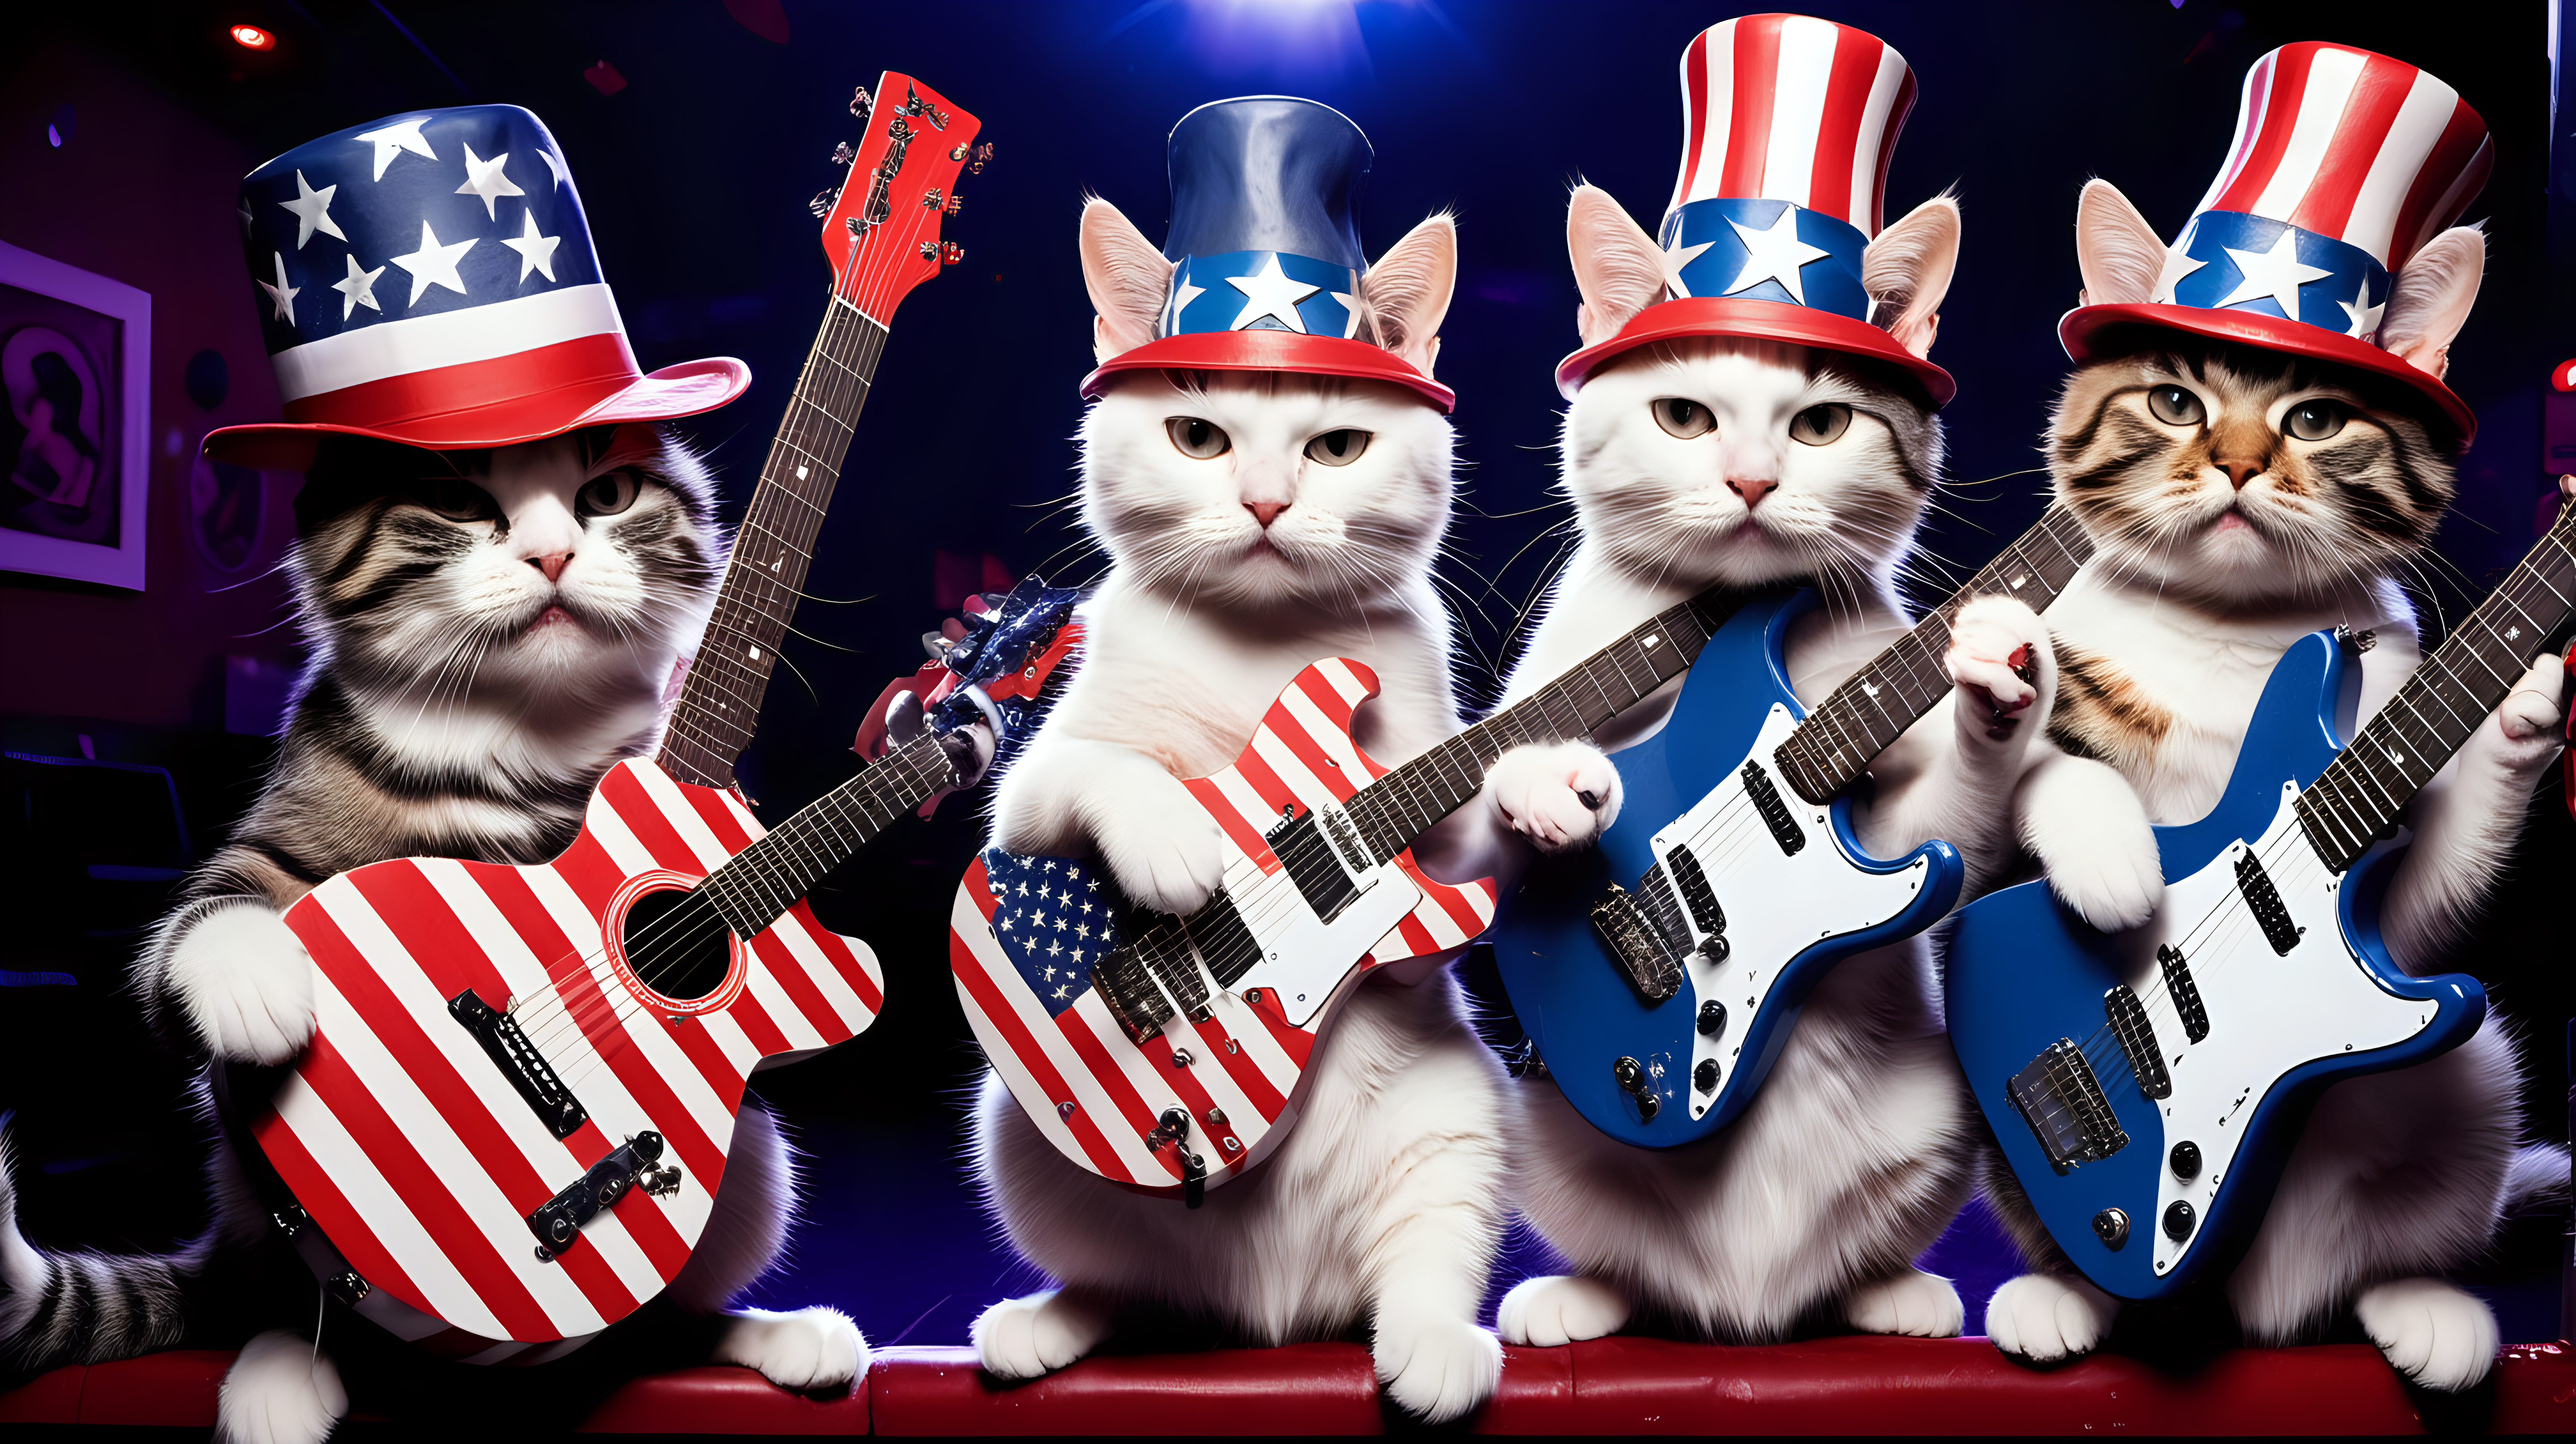 3 cats in hats playing stars and stripes guitars playing in a night club